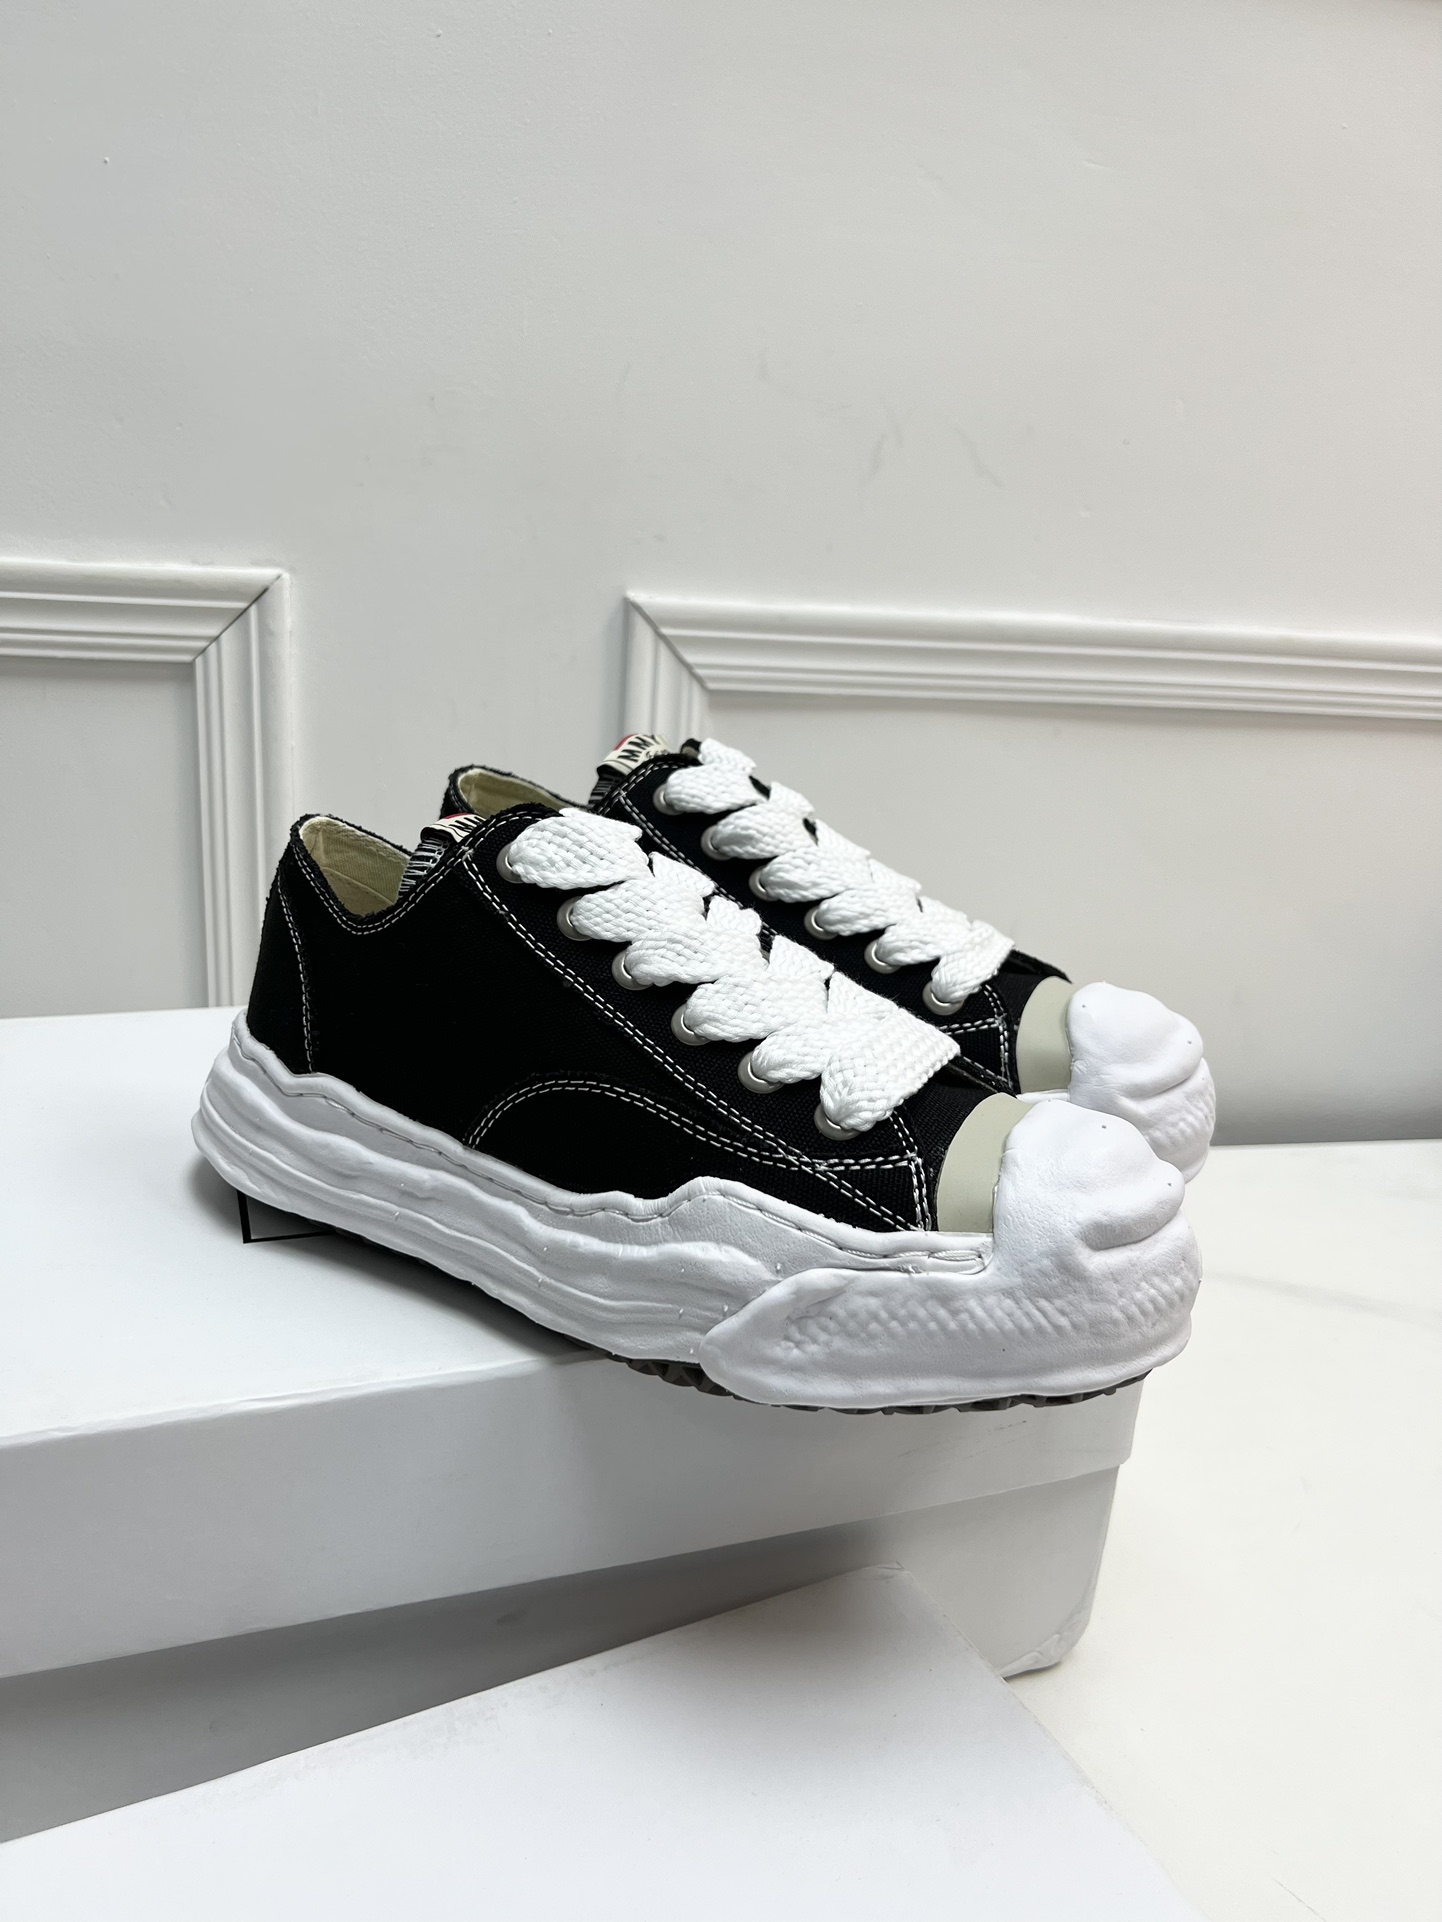 

Women Shoes Maison Mihara Yasuhiro Mmy Peterson Low-top Sneakers Over-dyed Og Sole Fashion Perfect Original Box Size 35-44, 7 as picture